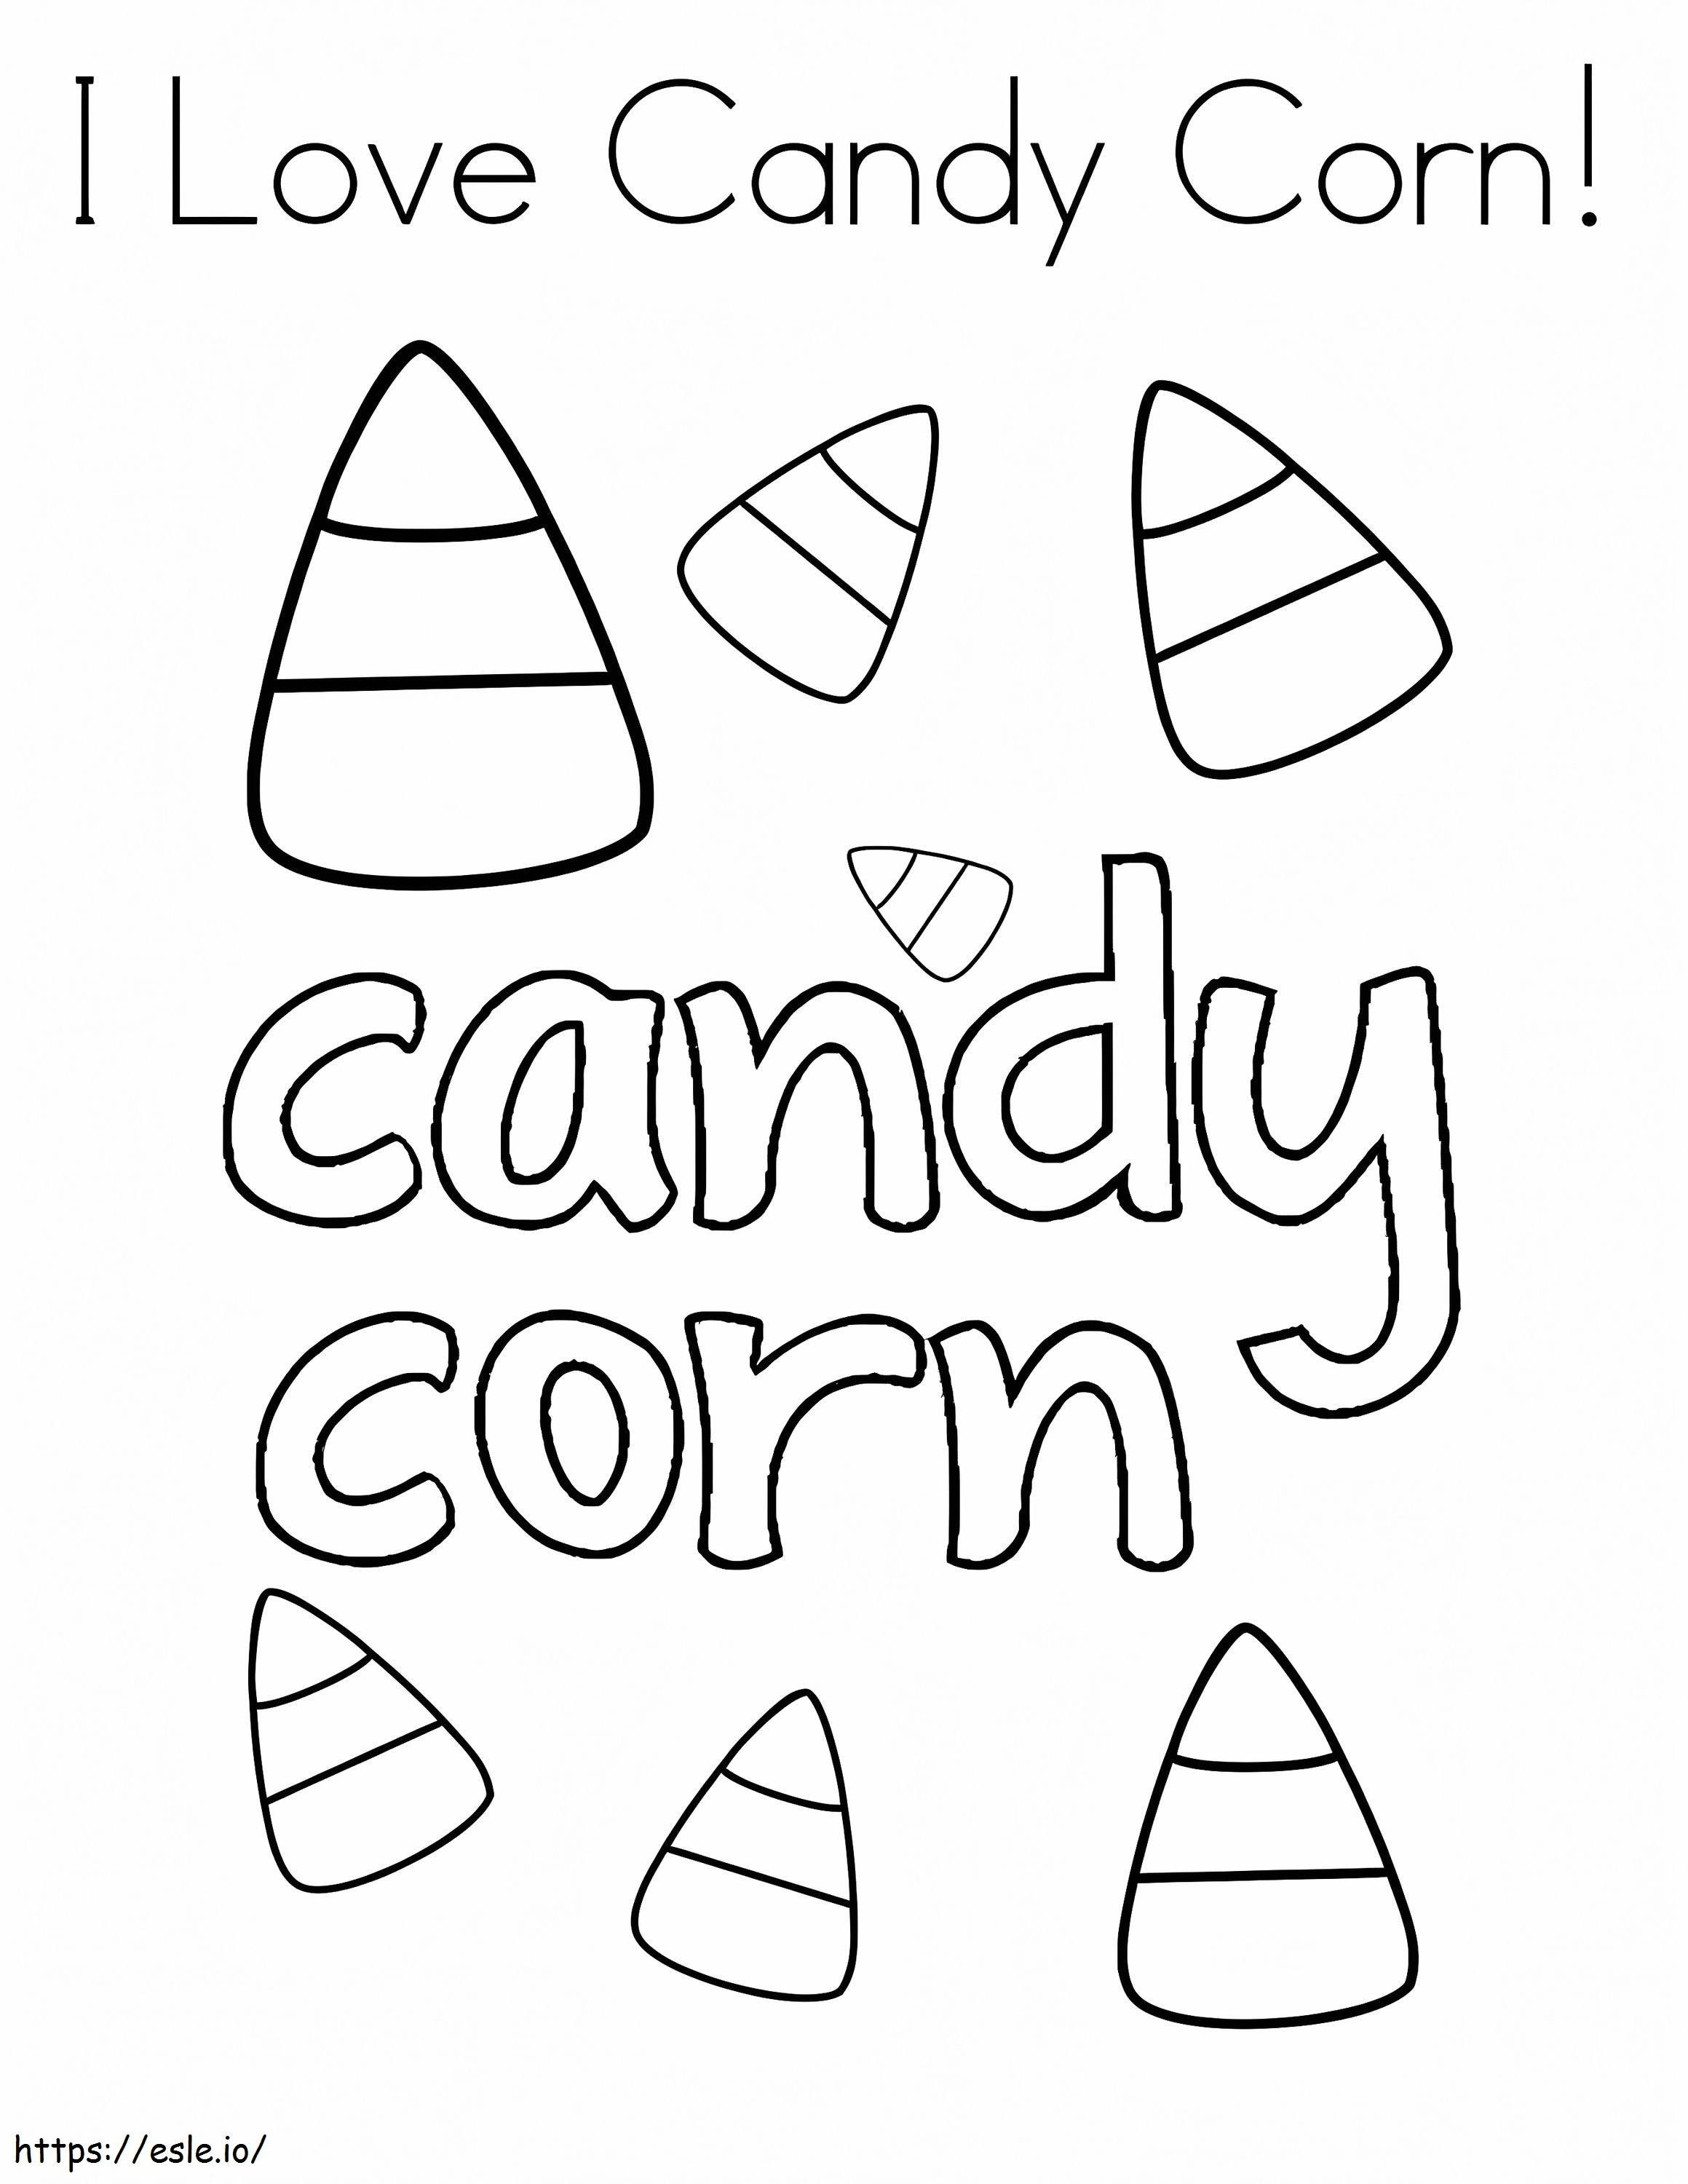 I Love Candy Corn coloring page